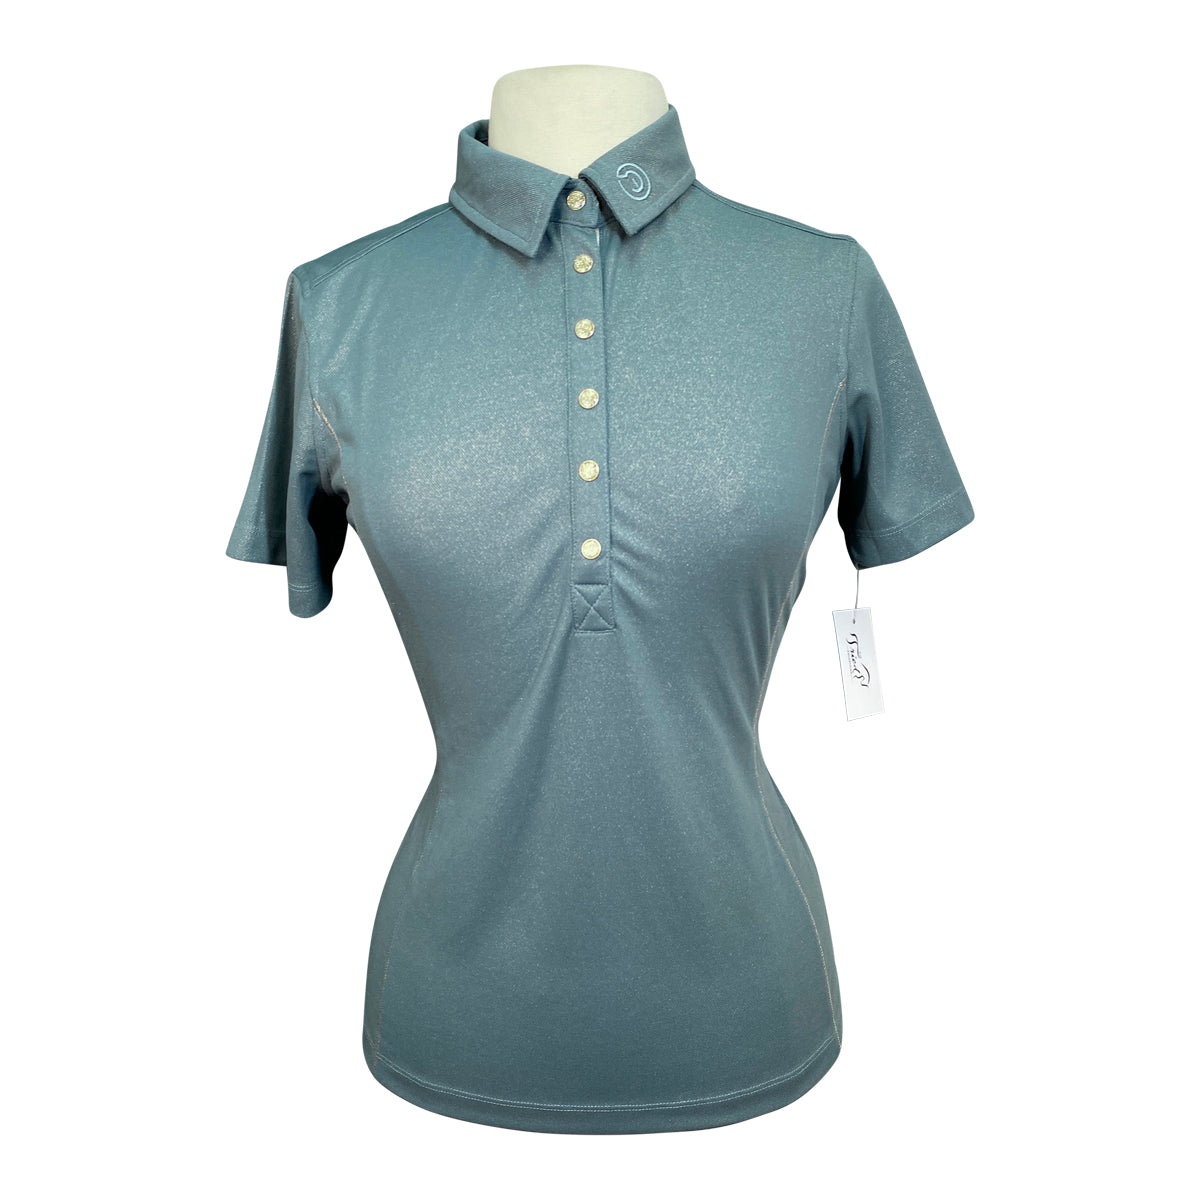 Anky Essential Polo Shirt in Blue Heron/Glitter 